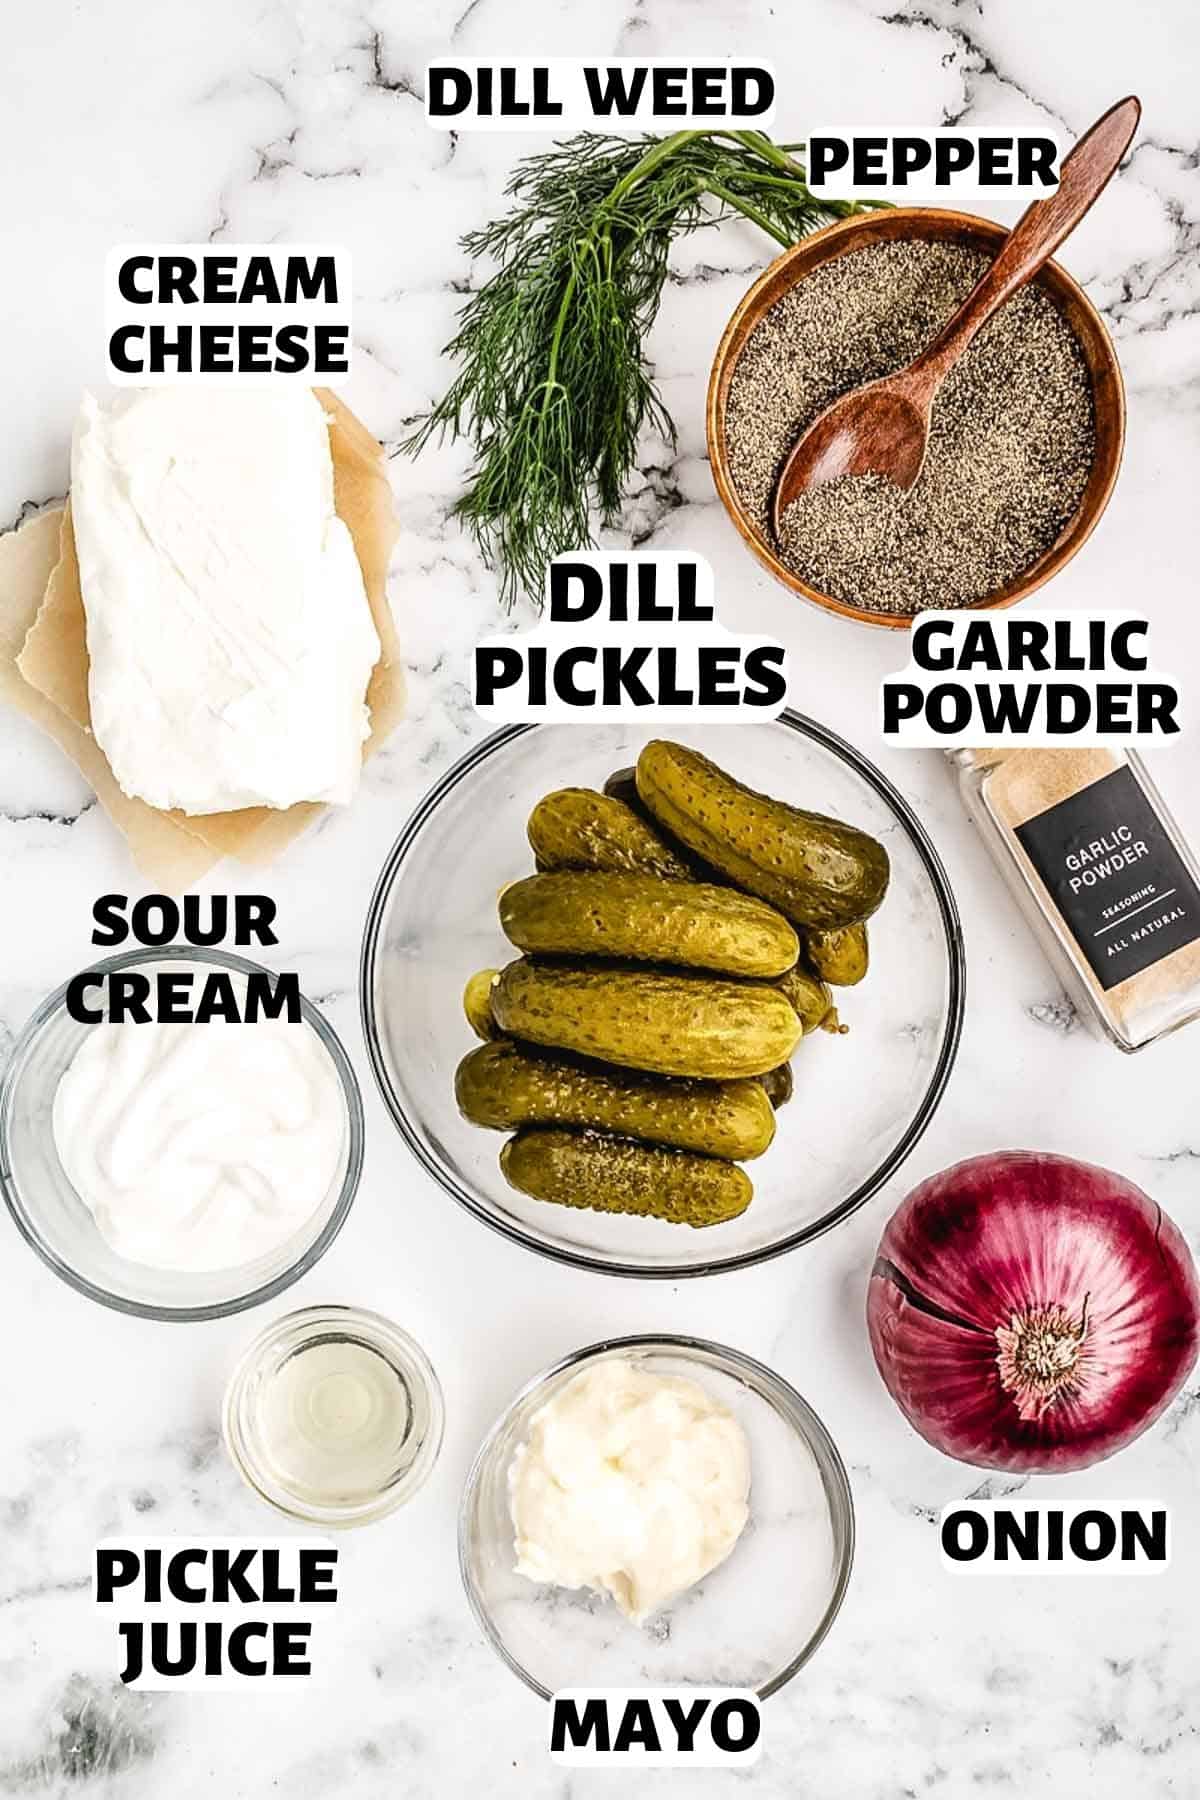 An labeled image of ingredient ingredients needed to make dill pickle dip.